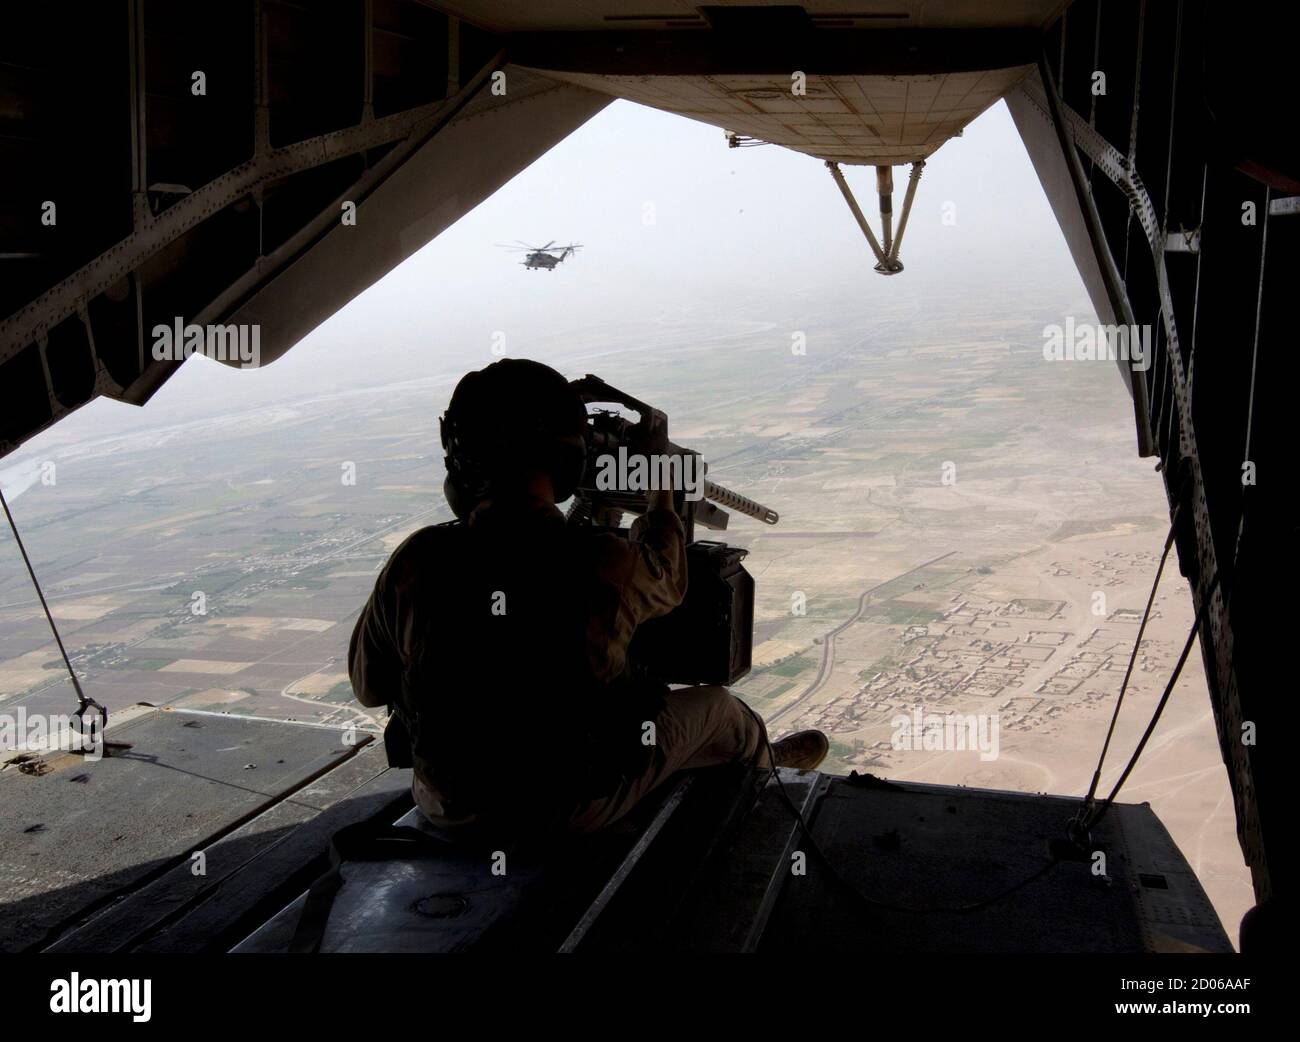 A gunner of U.S. Marines CH-53E Super Stallion helicopter flies during a Western Engagement operation over the Garsmir district of Helmand province, southern Afghanistan, July 7, 2011. U.S. Marines and Afghan security forces conducted a joint operation aiming to extend their presence west of Helmand river.    REUTERS/Shamil Zhumatov  (AFGHANISTAN - Tags: POLITICS MILITARY TRANSPORT) Stock Photo